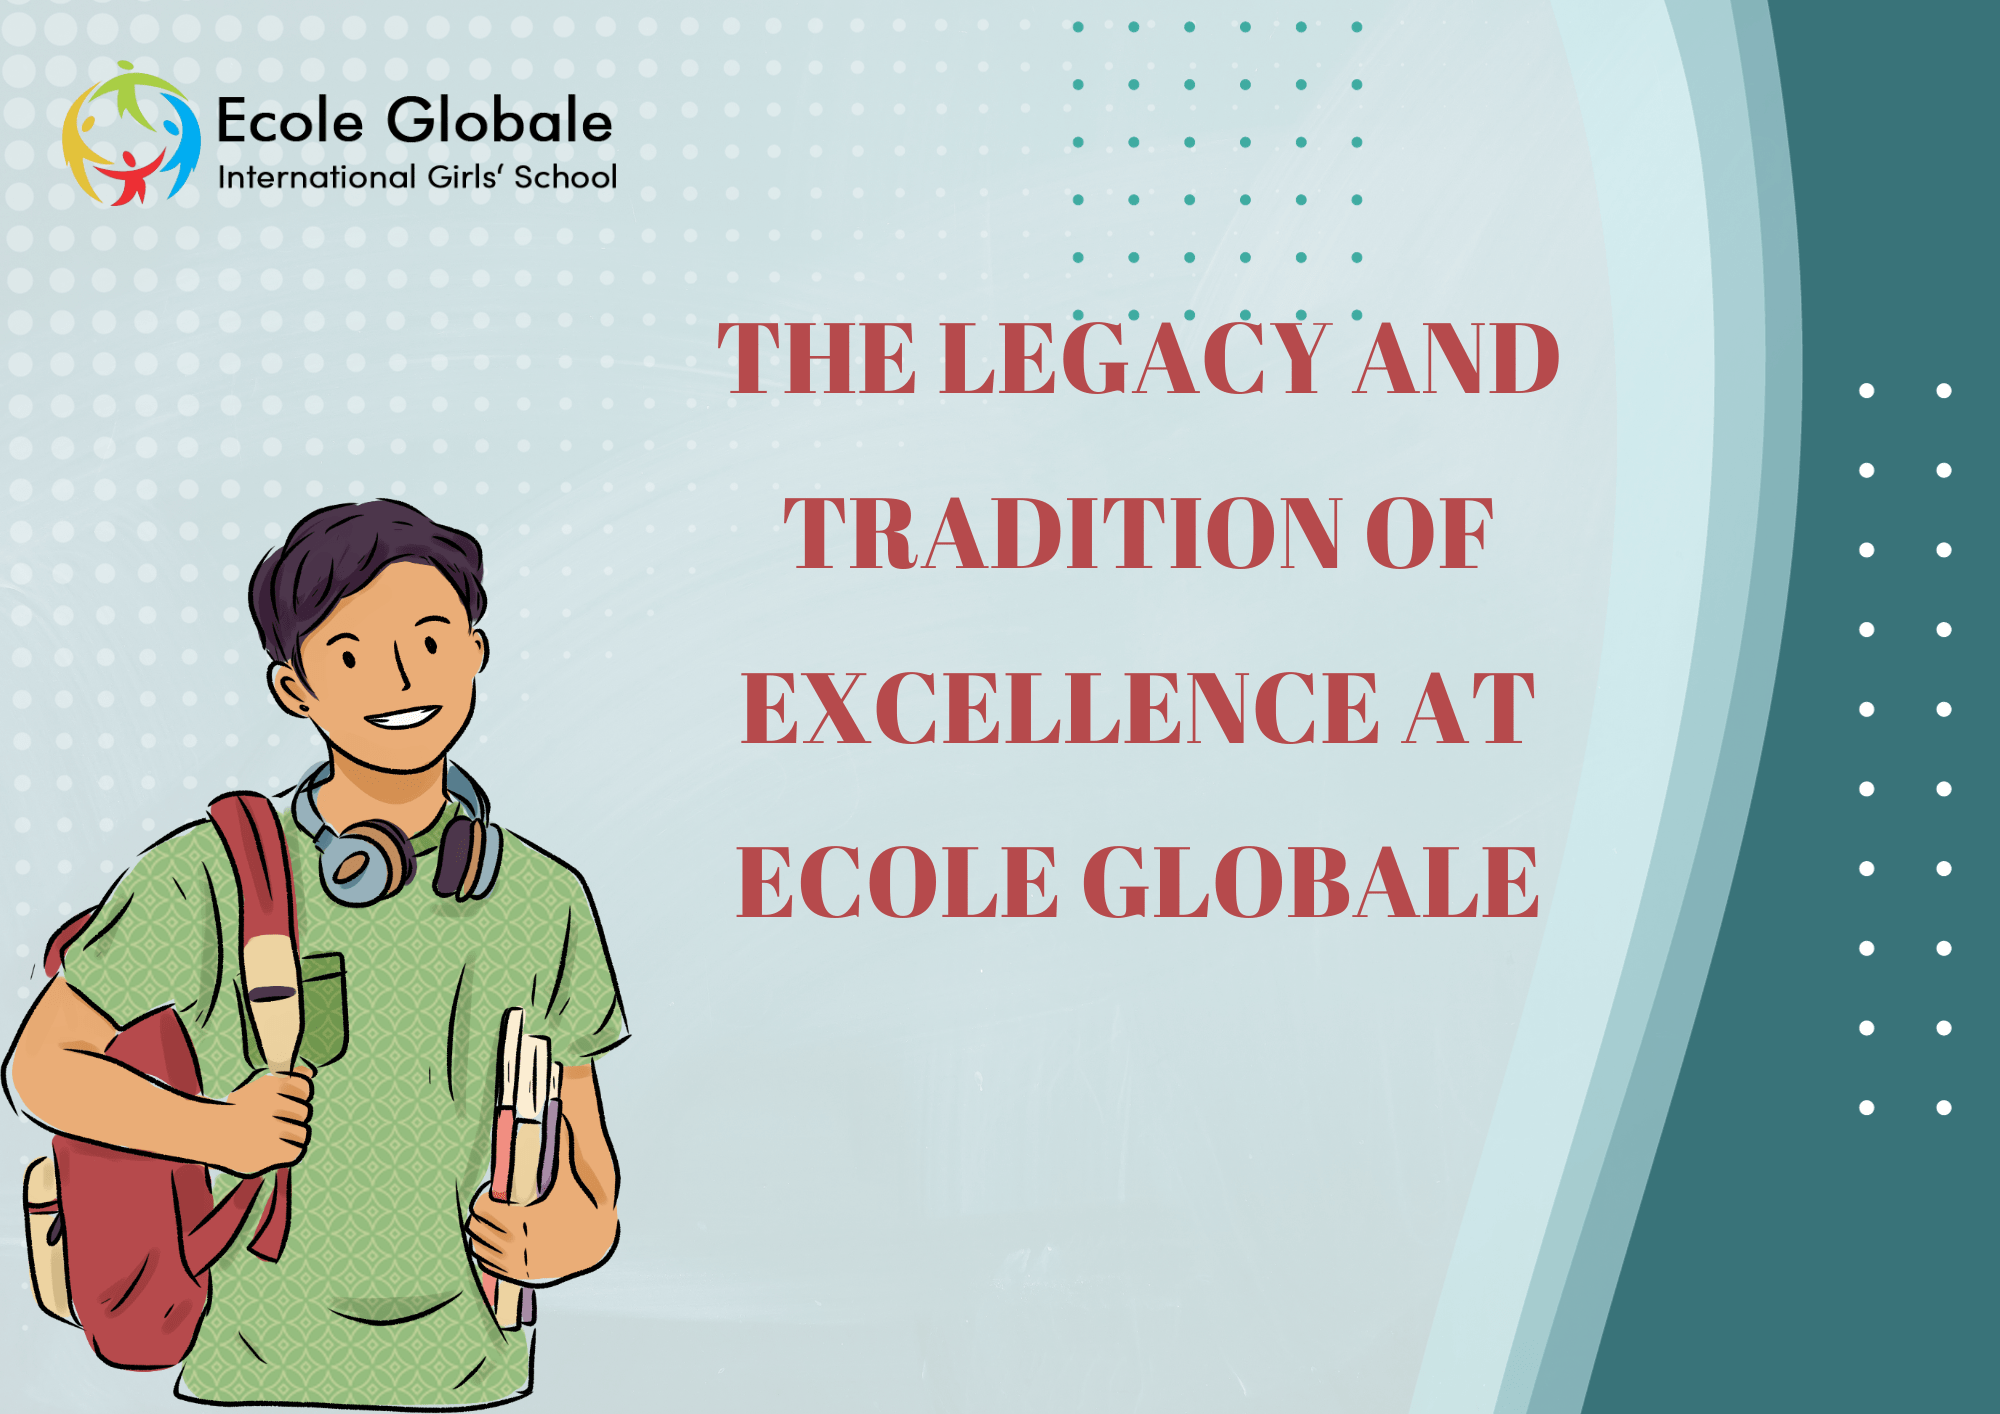 You are currently viewing The Legacy and Tradition of Excellence at Ecole Globale in Dehradun